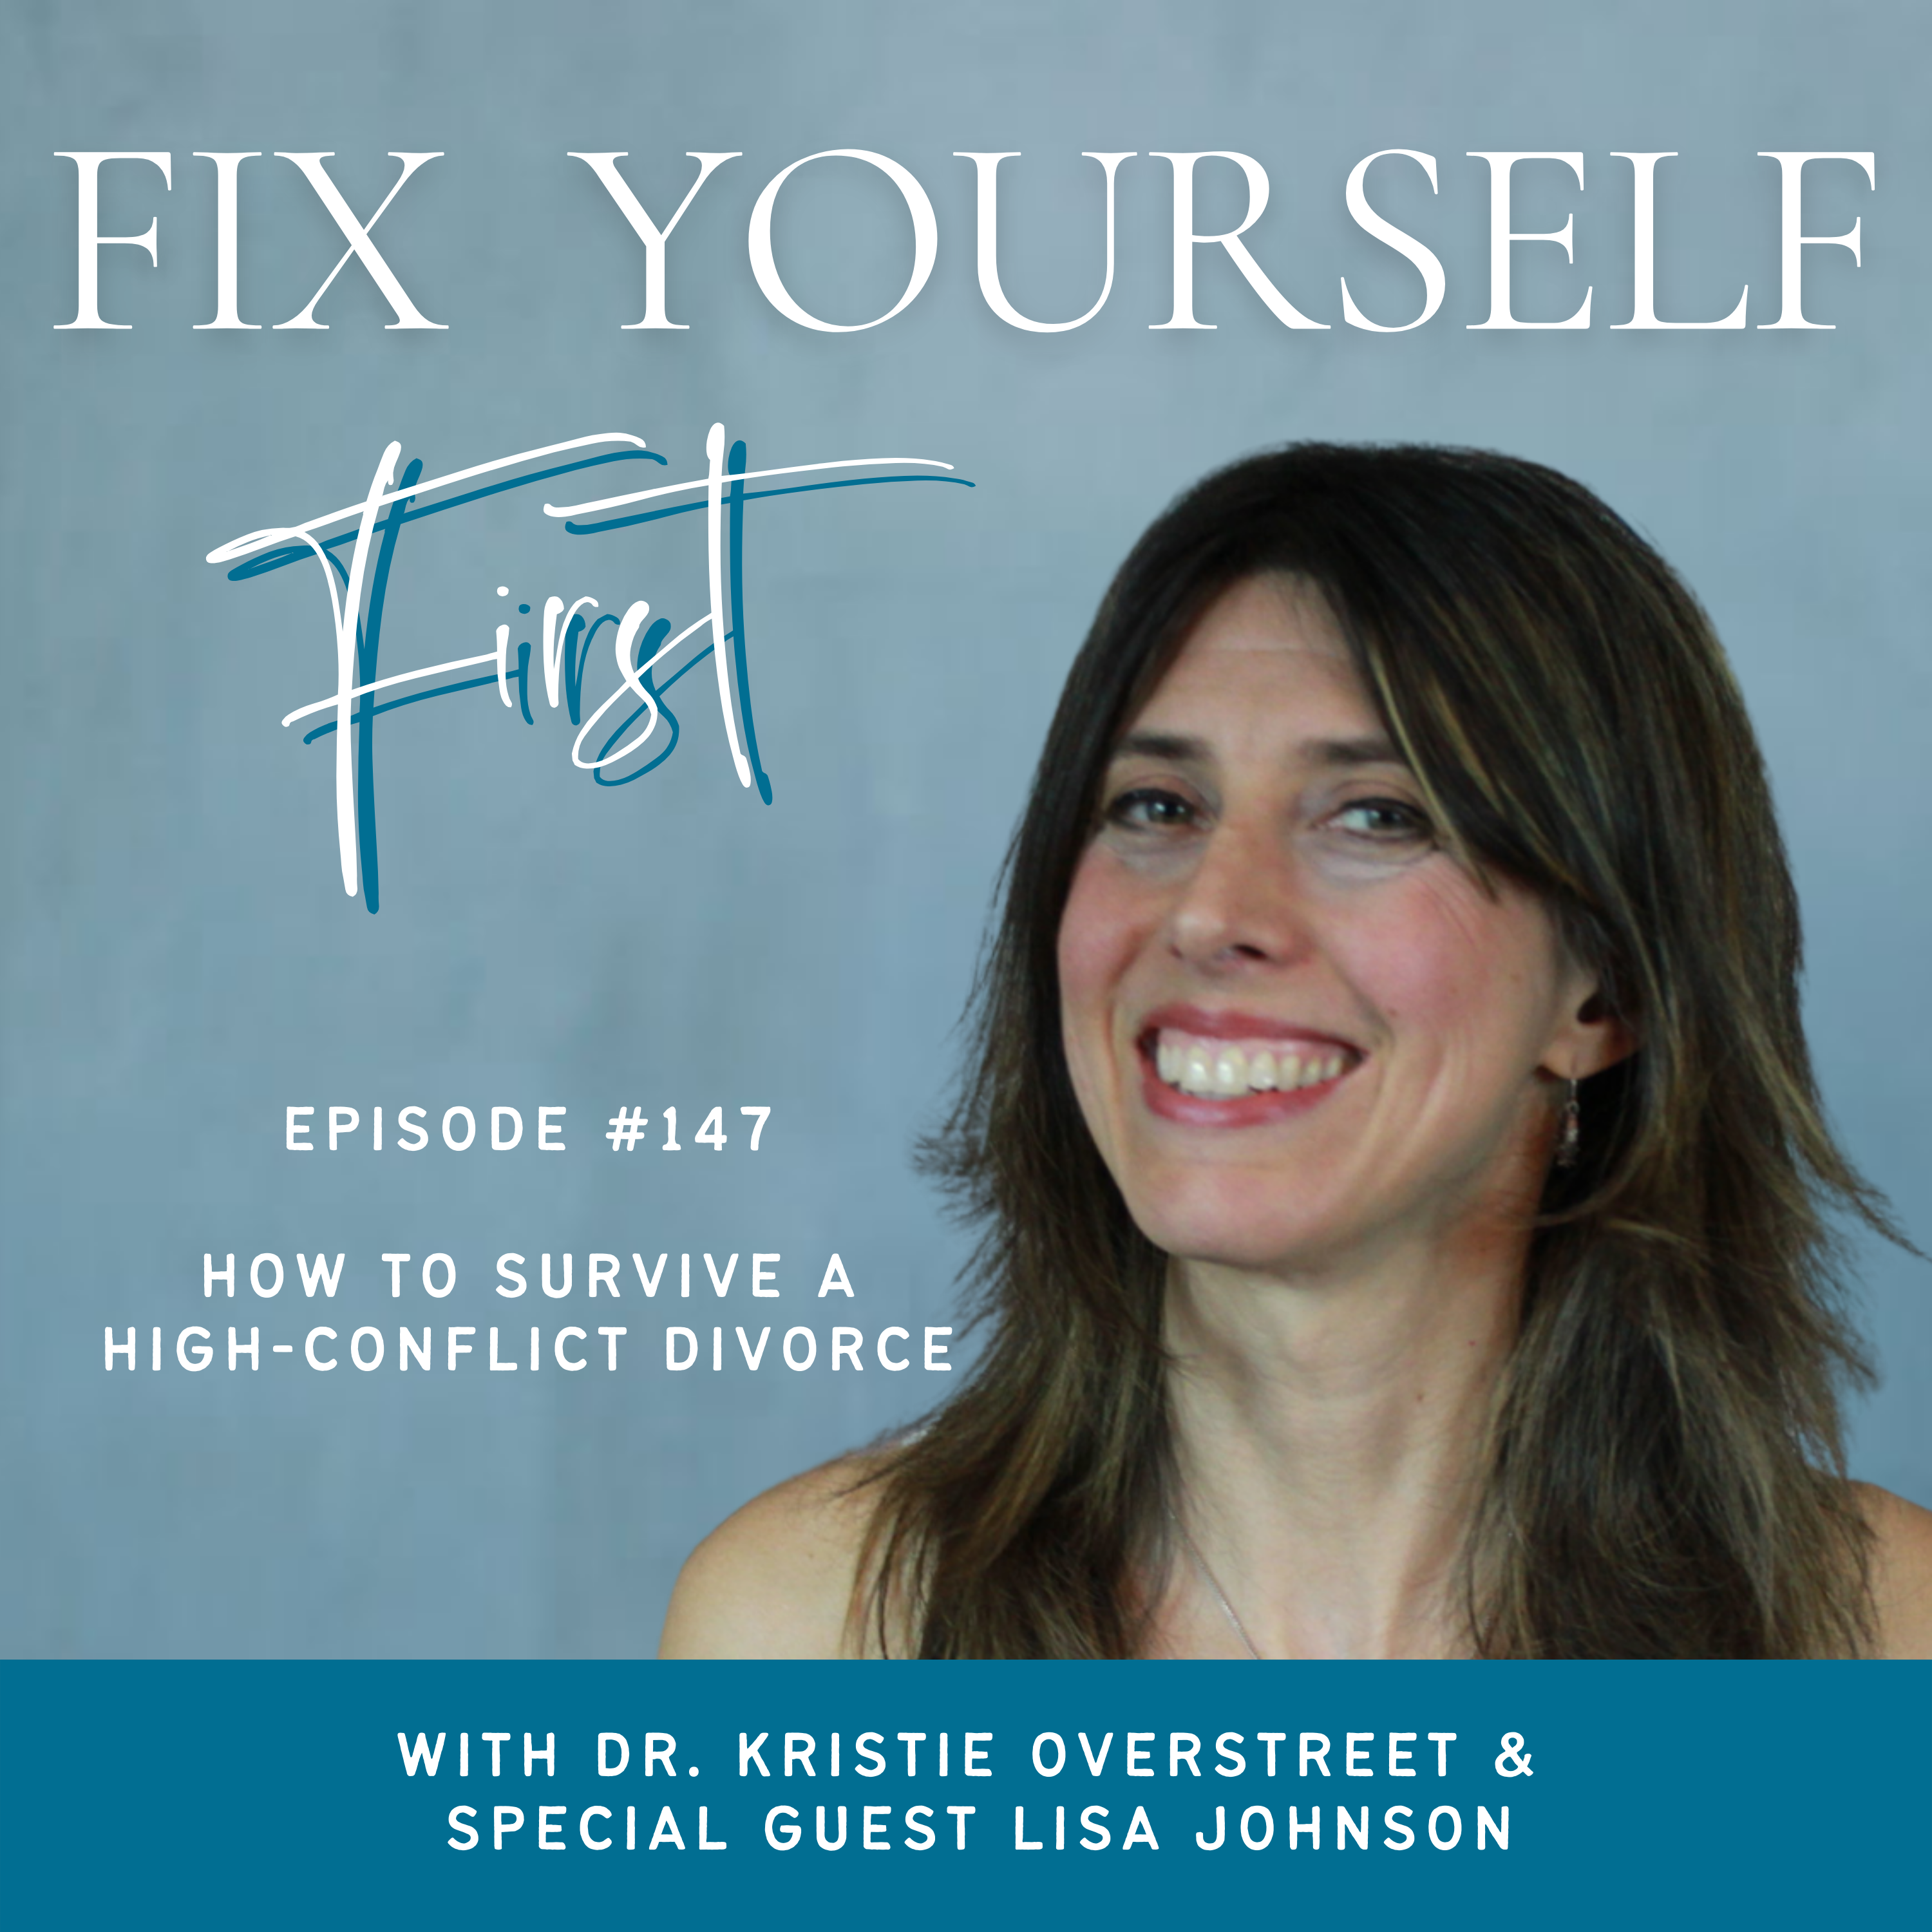 Fix Yourself First Episode 147 How to Survive a High-Conflict Divorce with Lisa Johnson